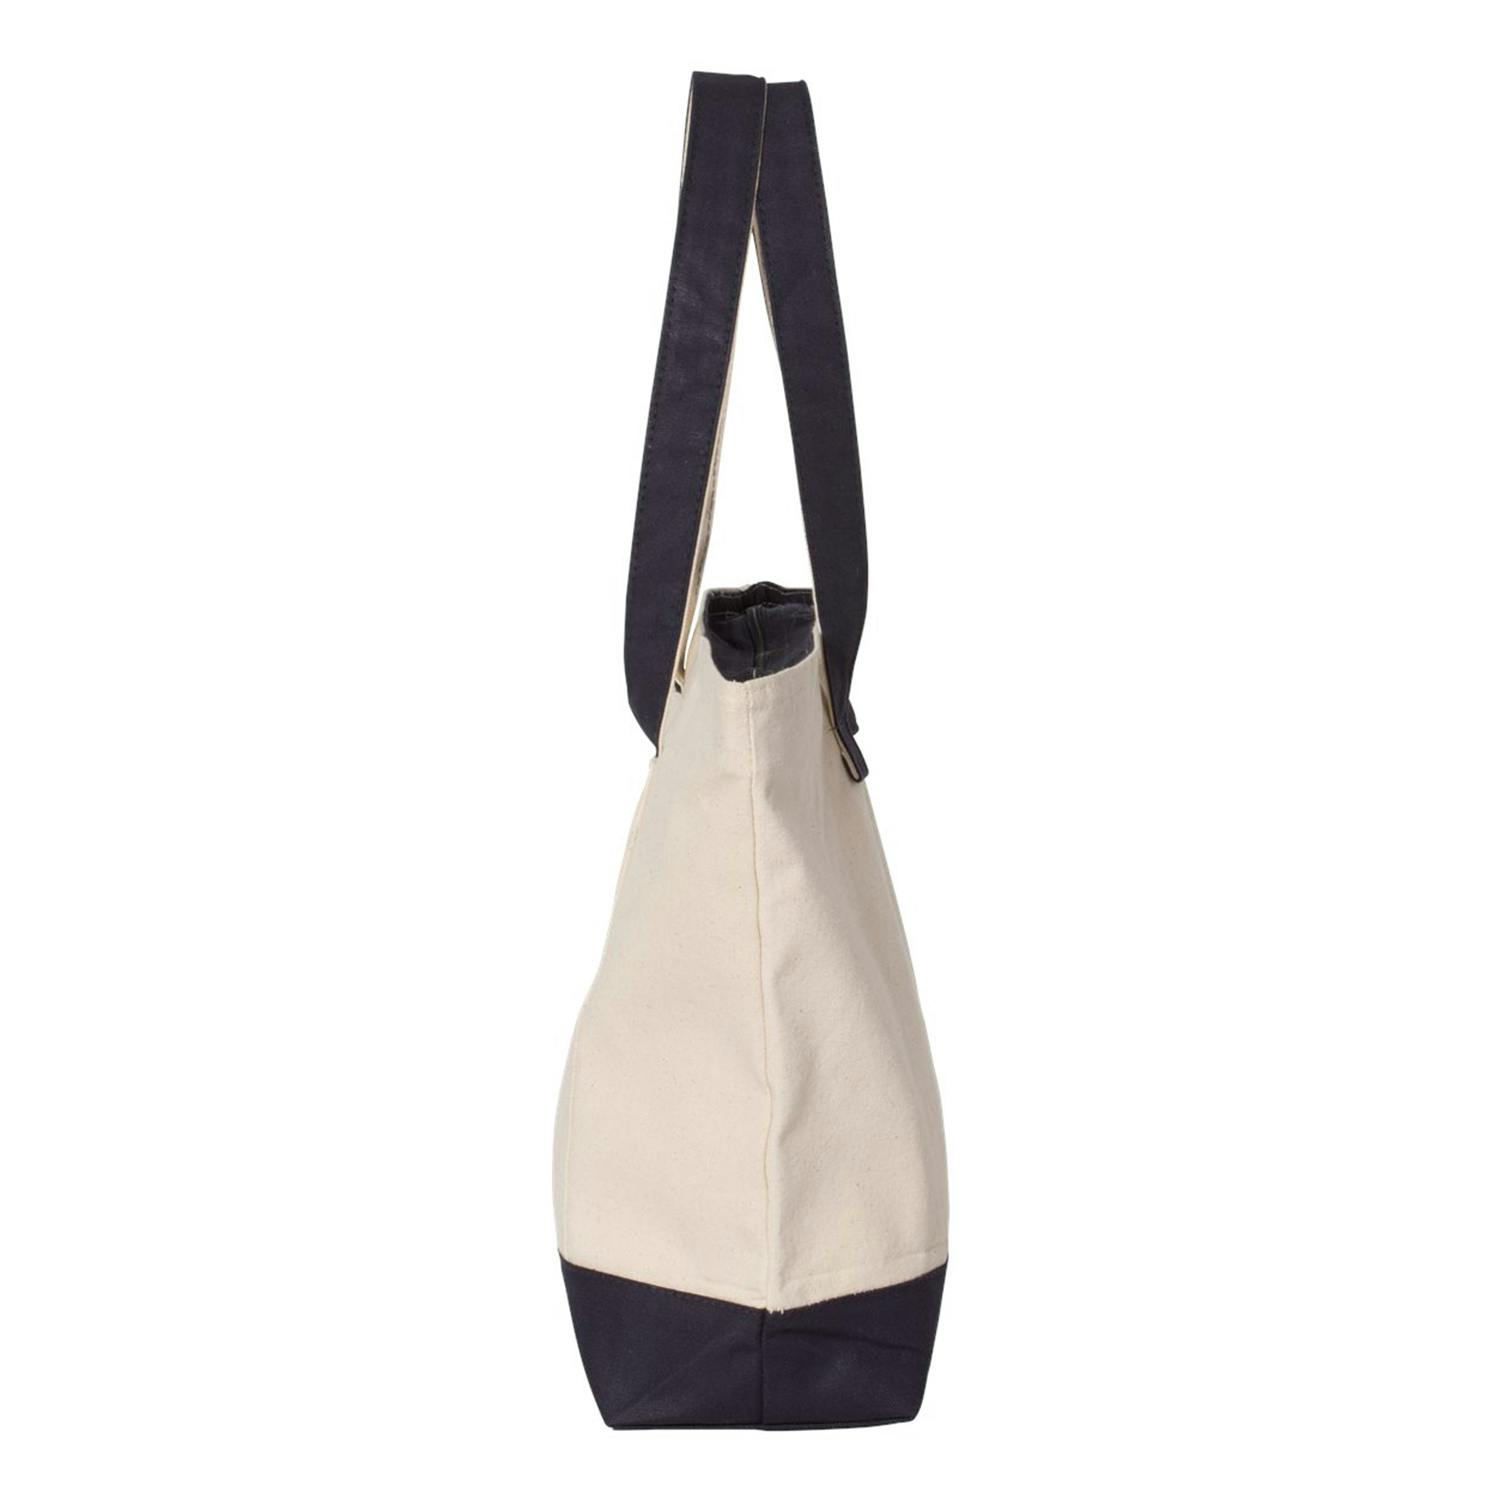 Q-Tees Zippered Canvas Tote Bag - additional Image 1